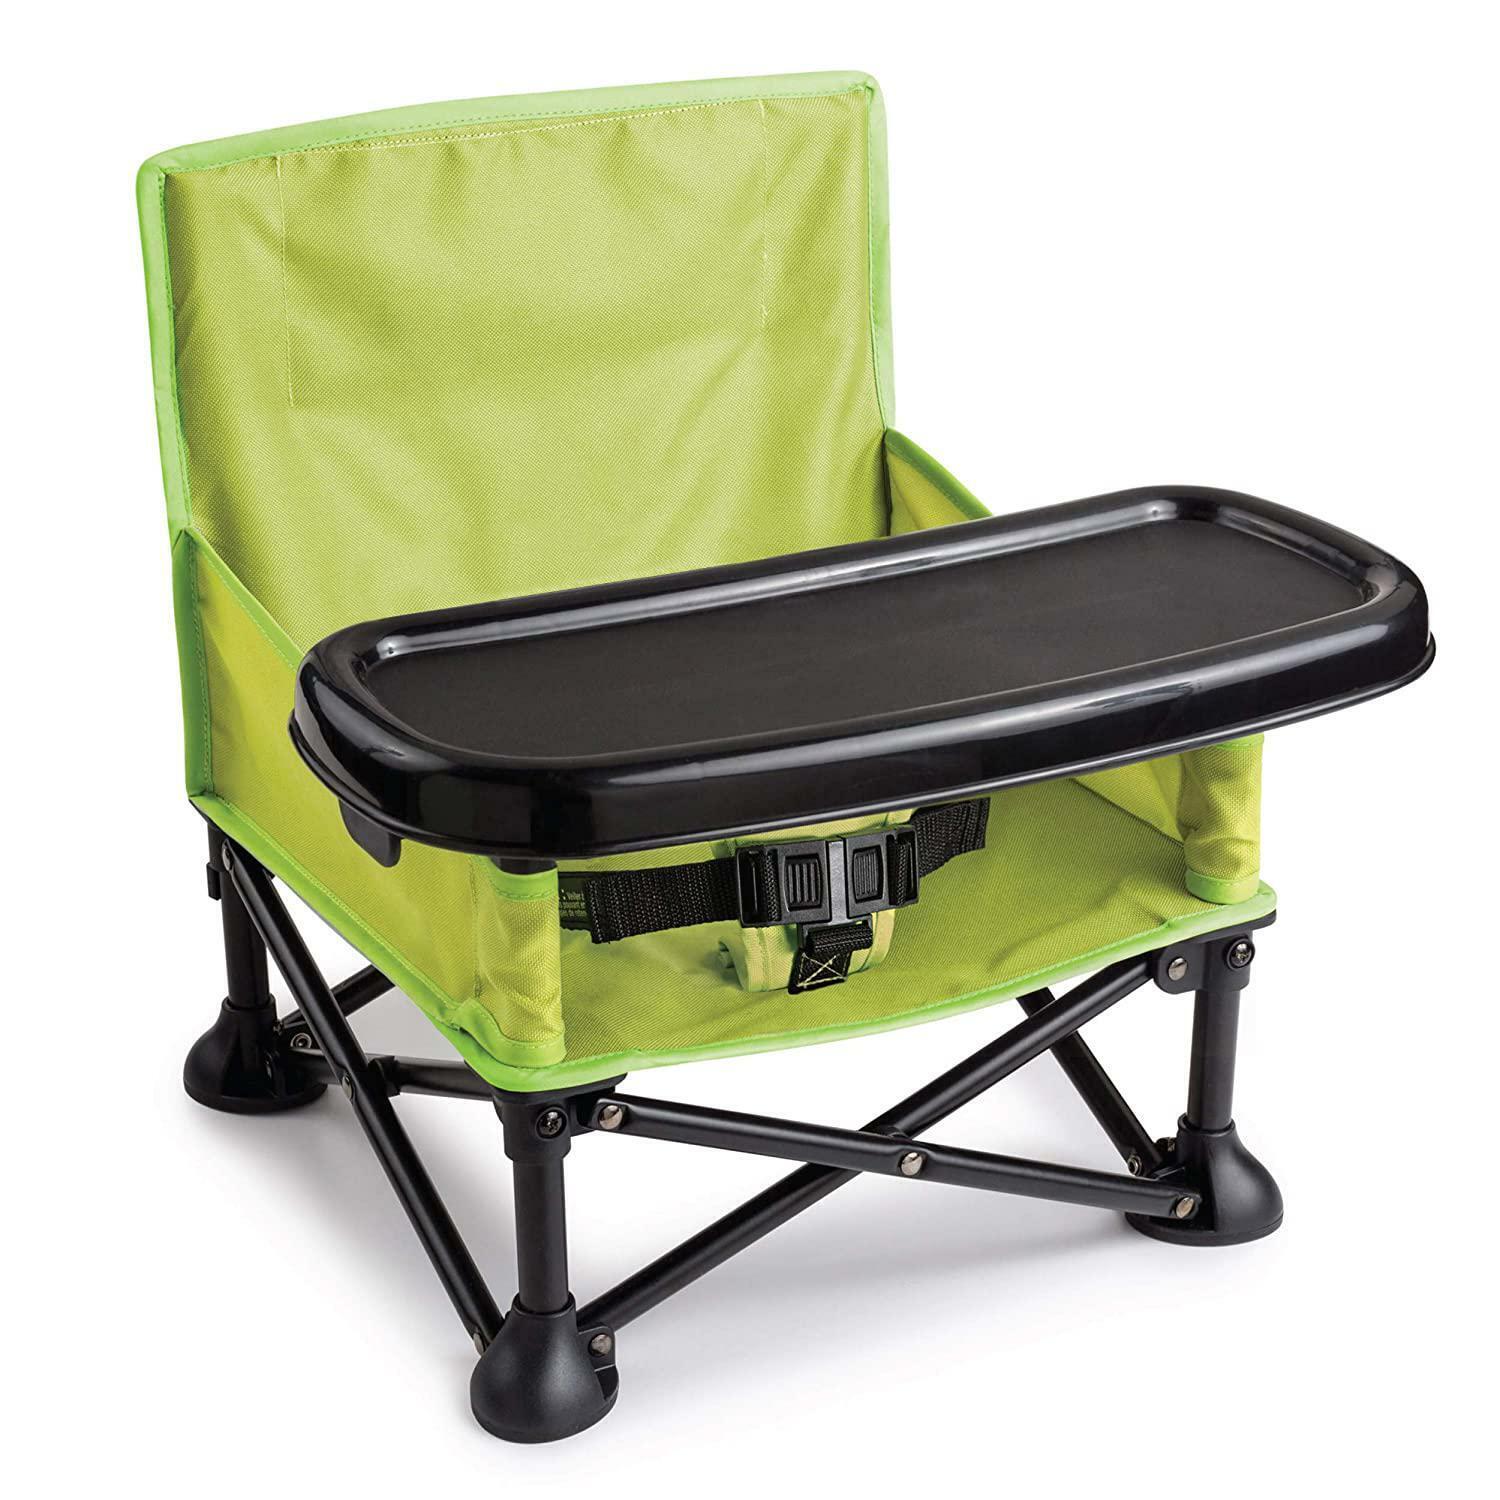 Portable Booster Chair Green Seat For Indoor Outdoor Use Compact Fold